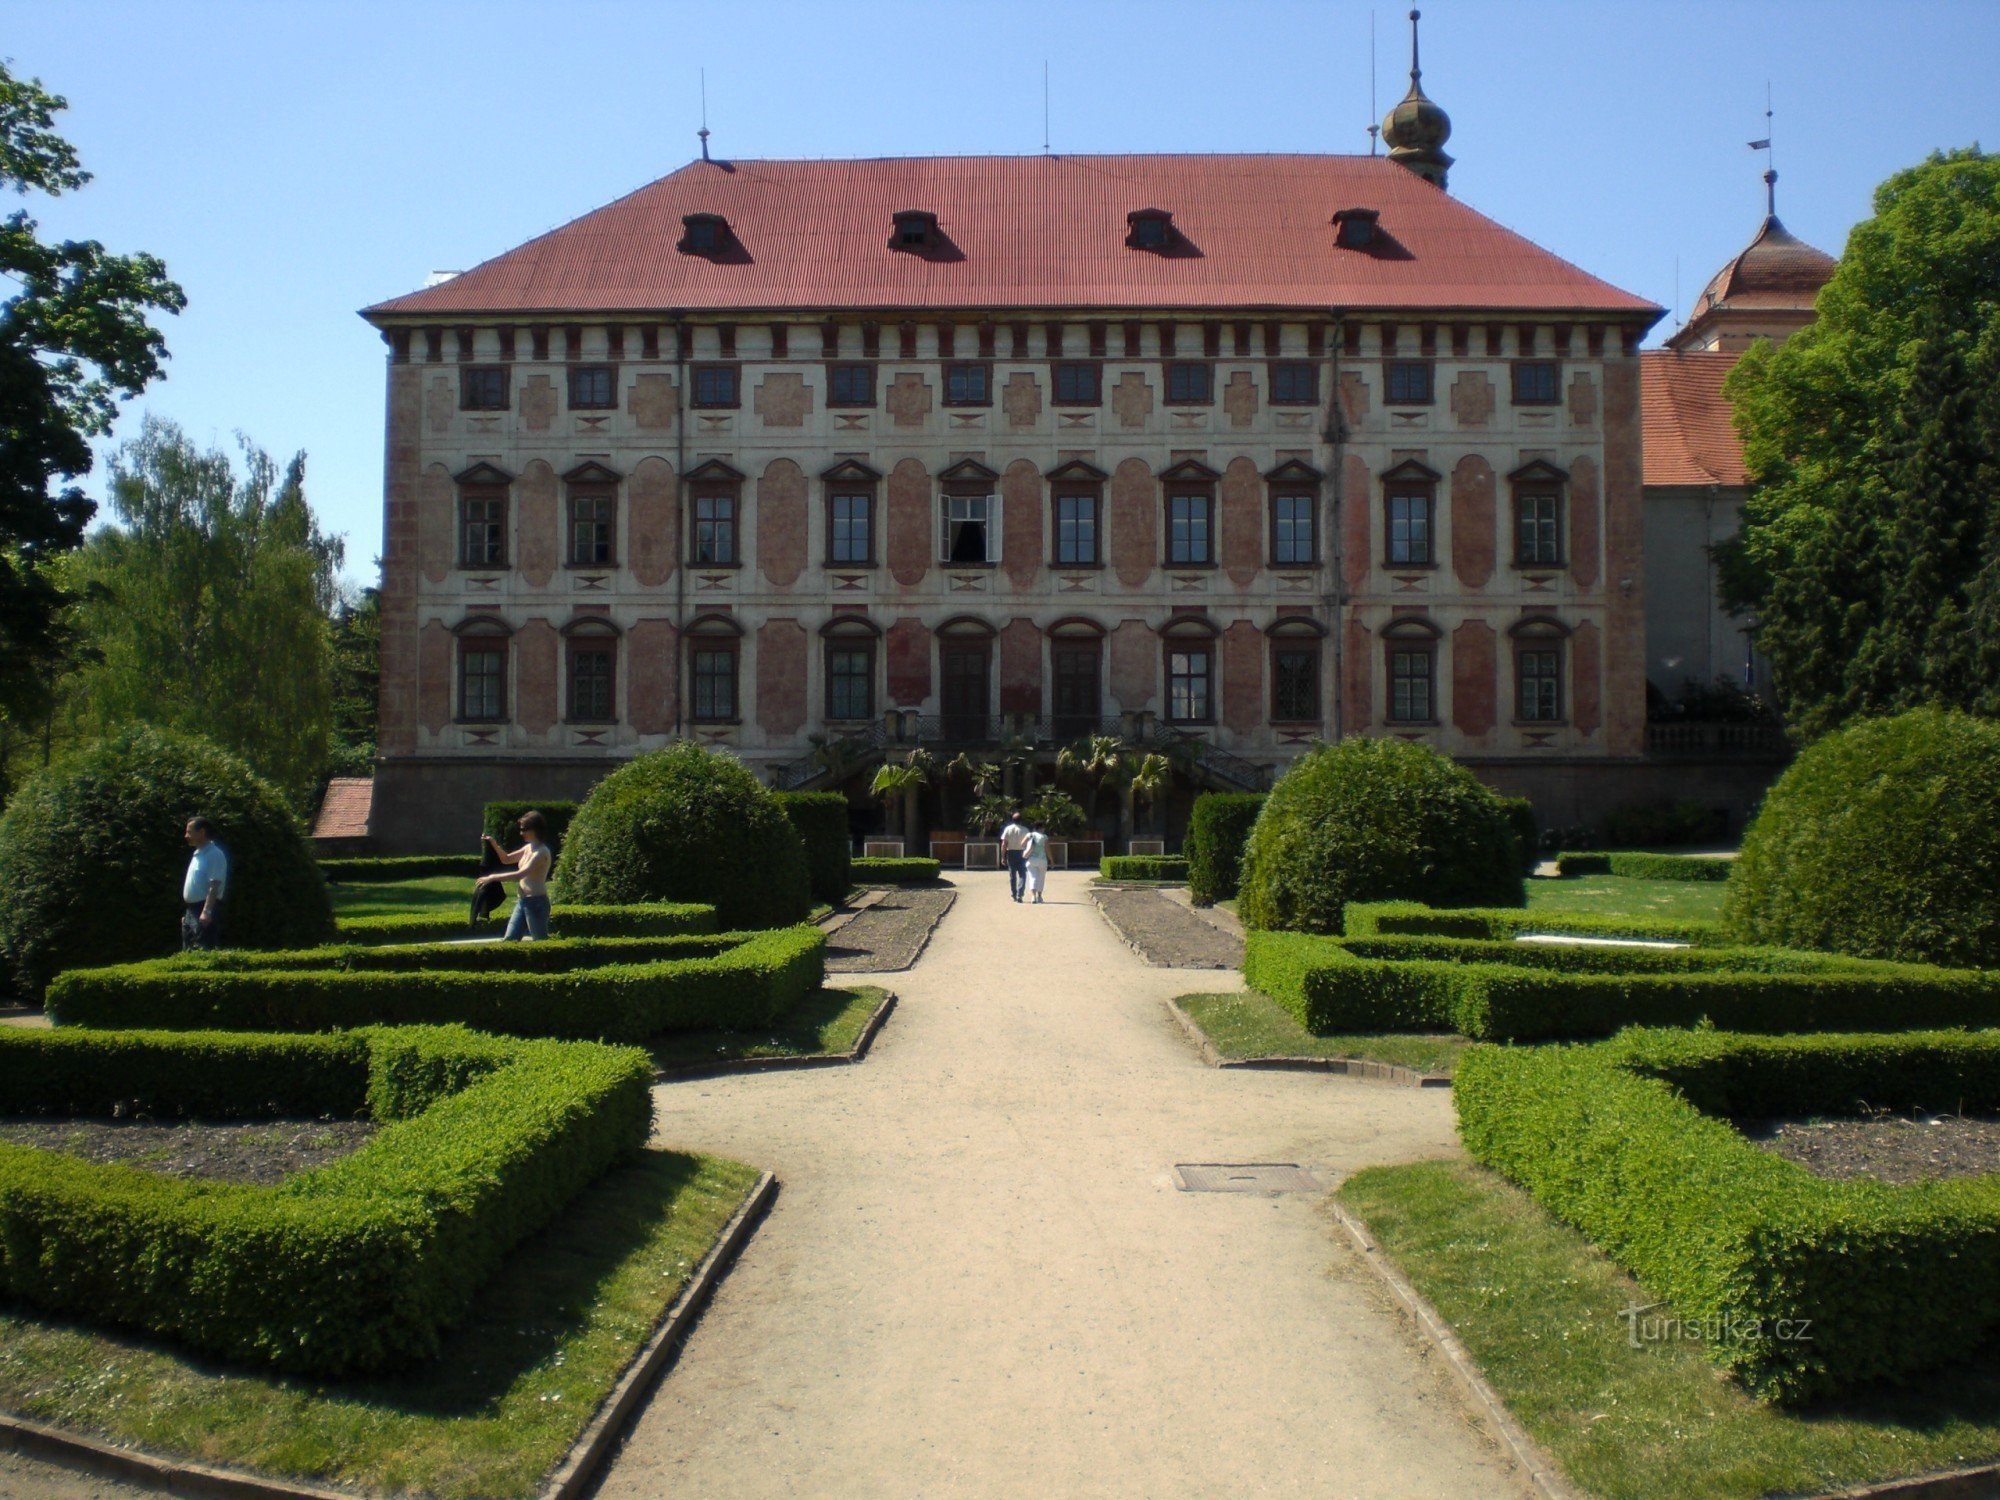 view from the garden to the castle